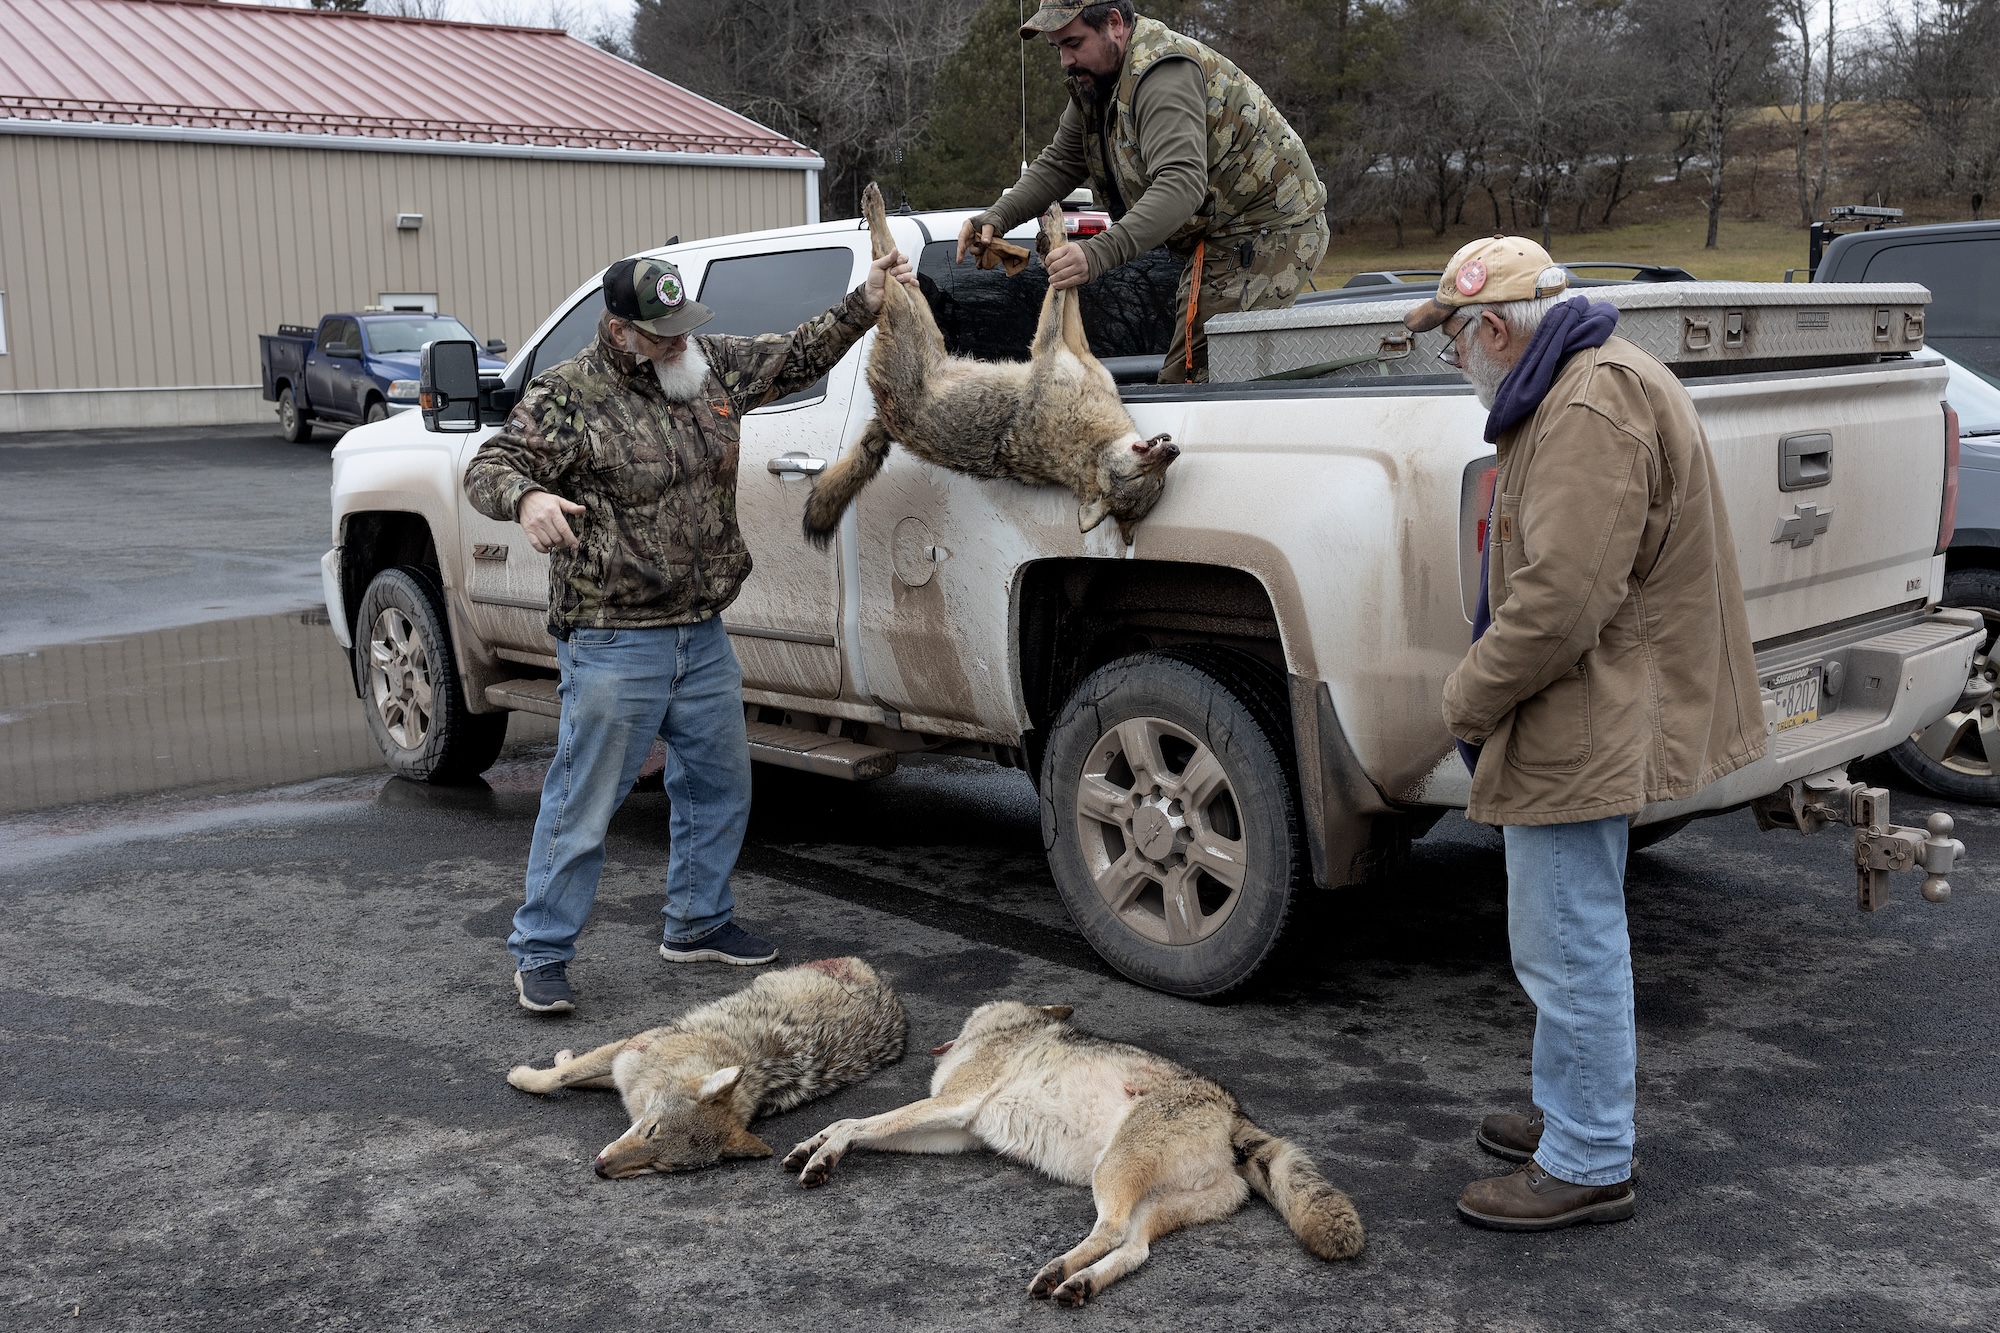 hunters unloading several coyotes from a white pickup truck